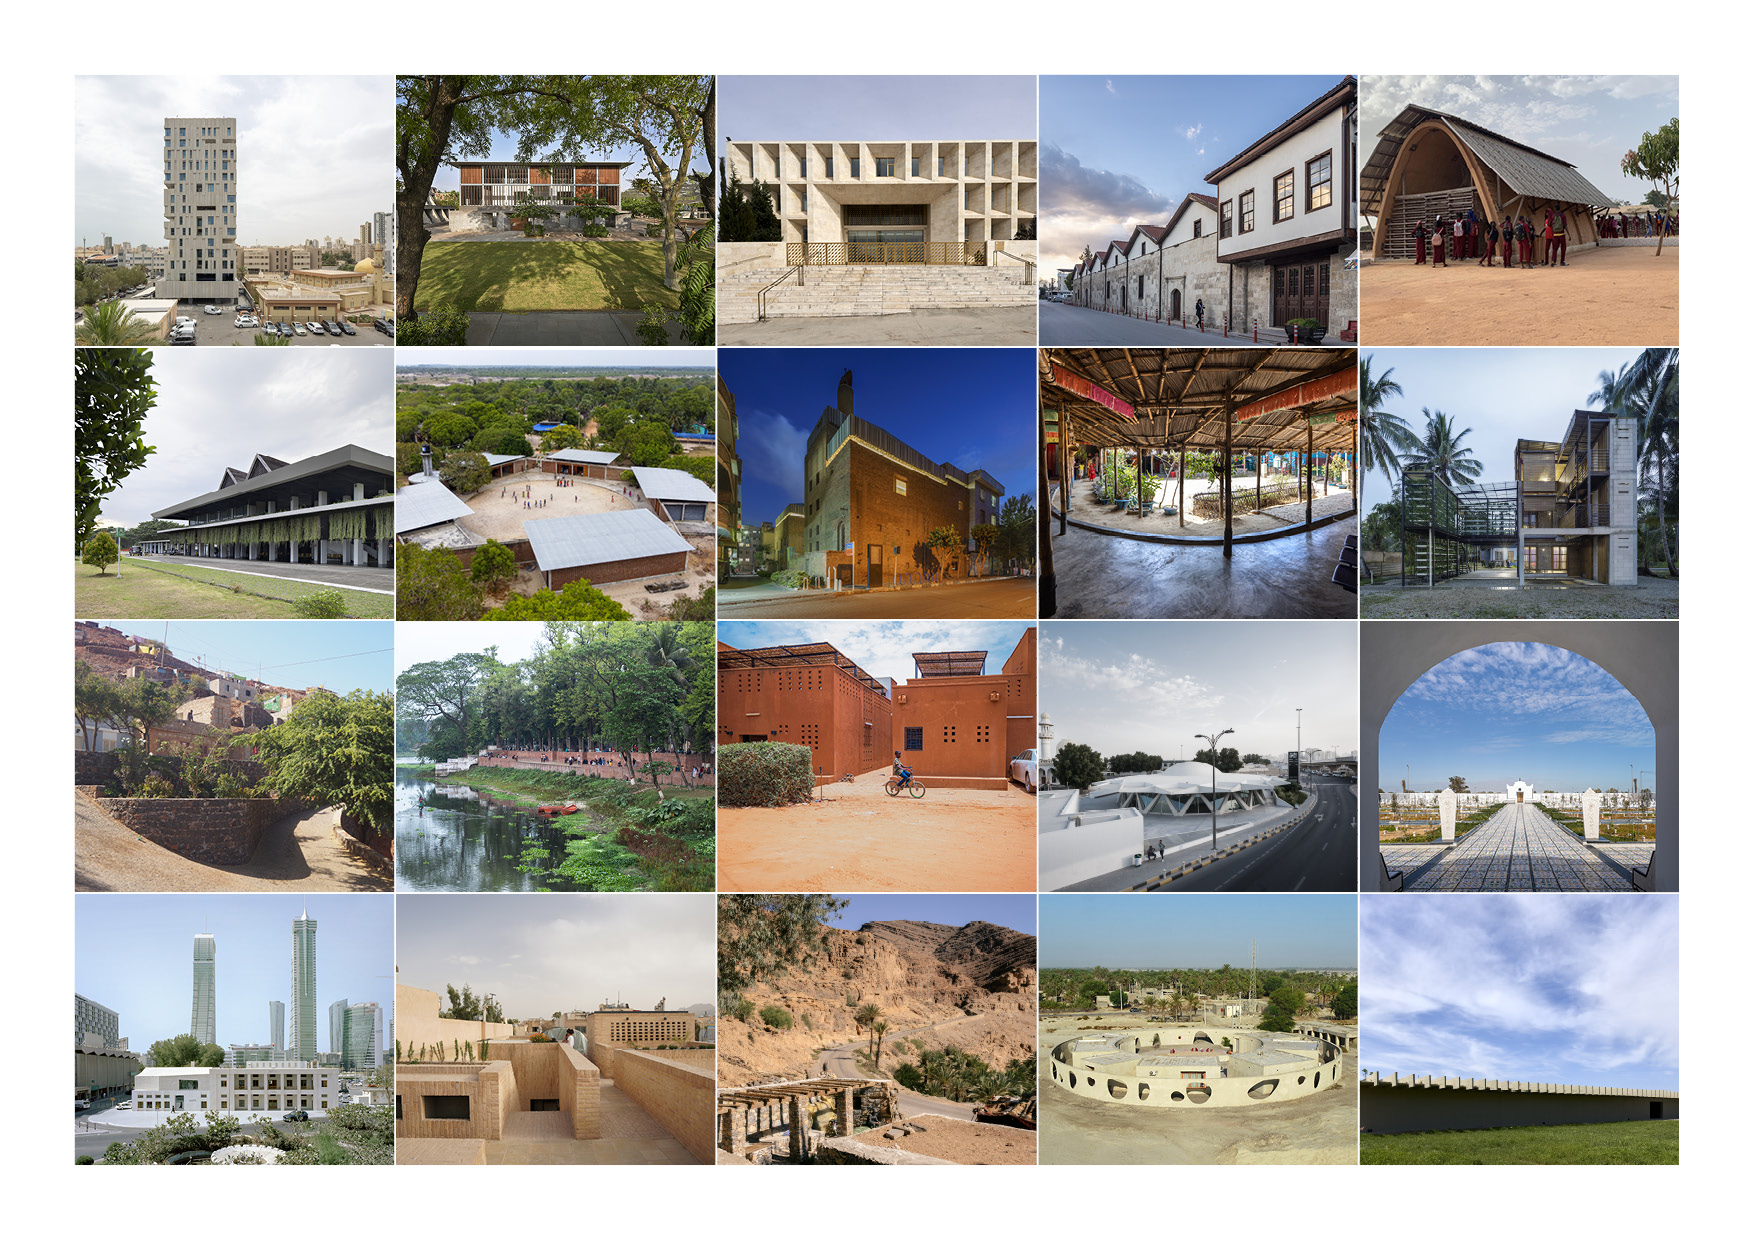 2022 Aga Khan Award for Architecture Shortlisted Projects